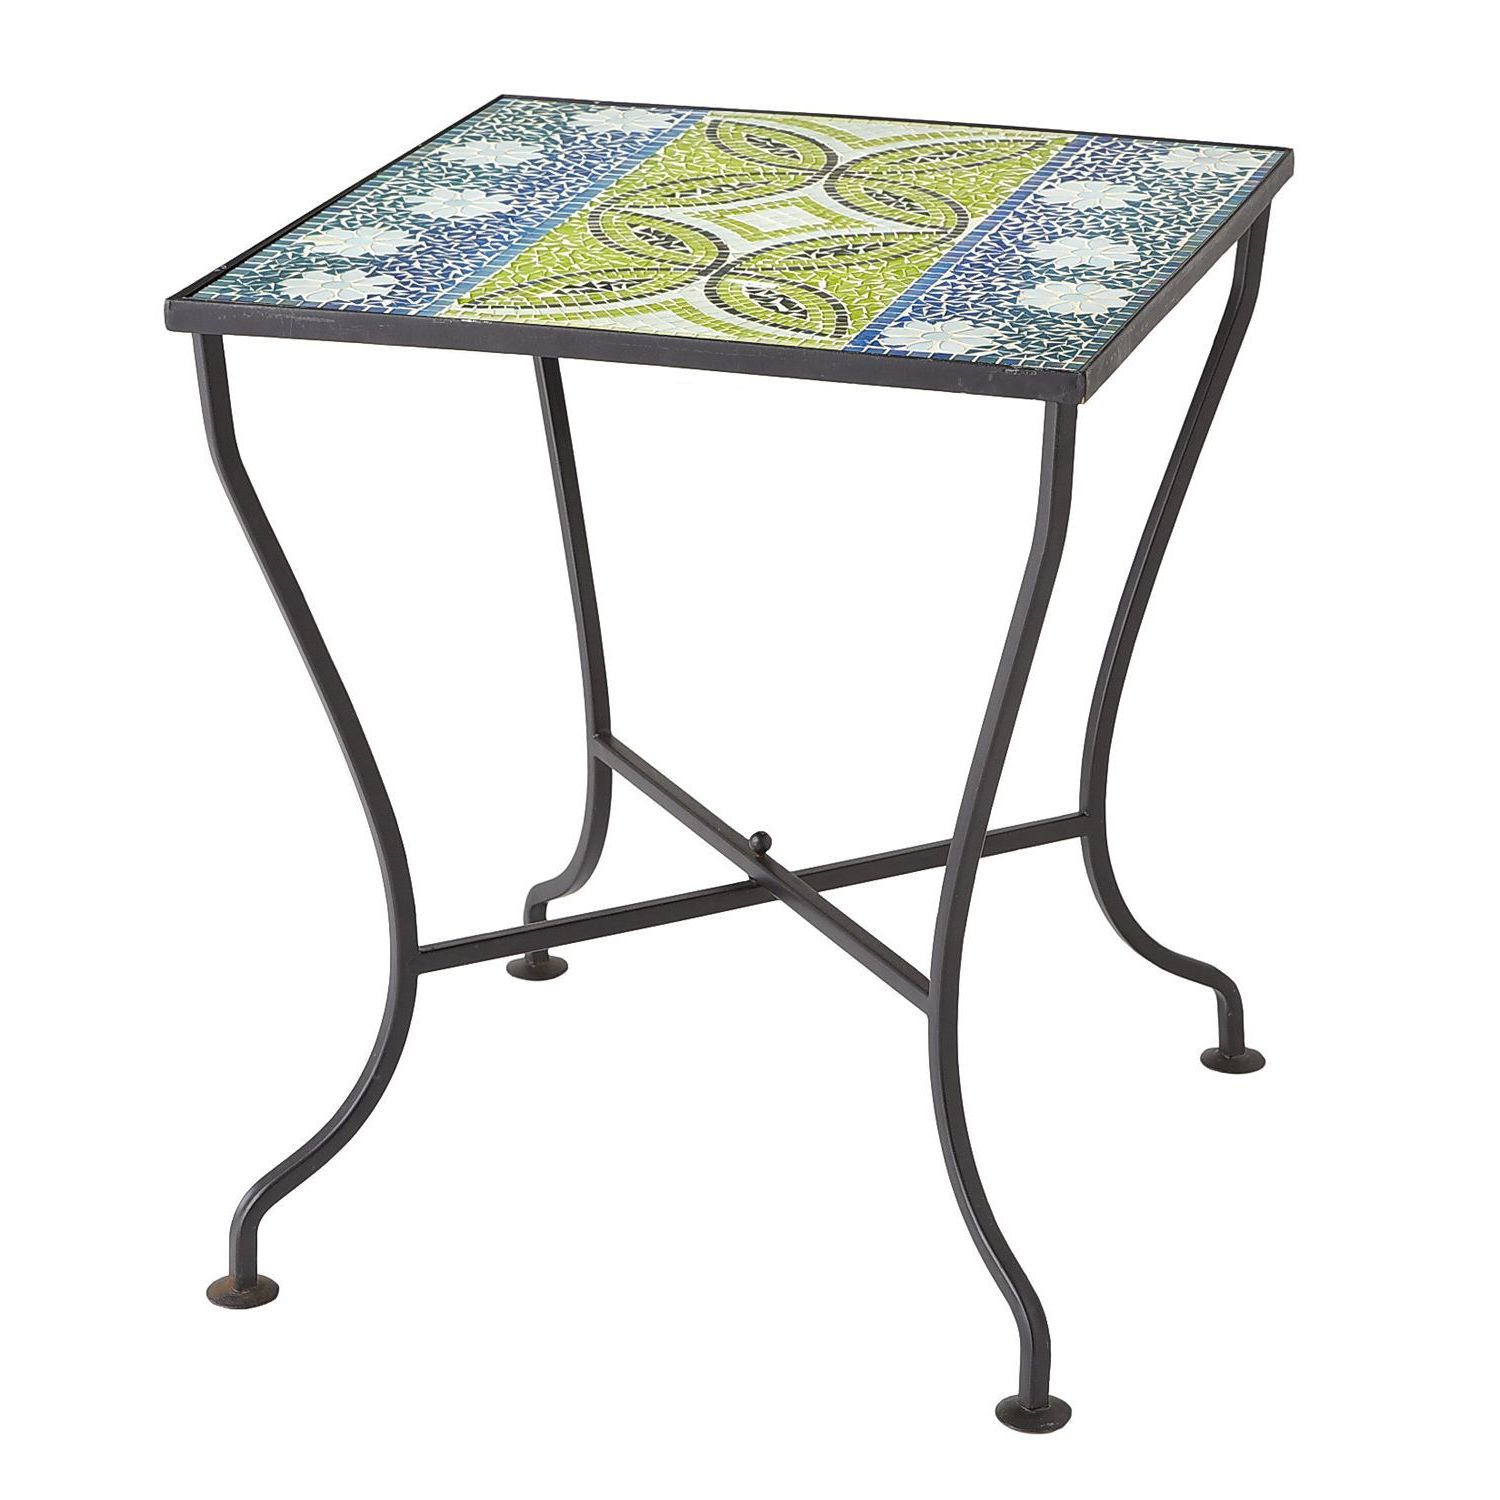 Mosaic Accent Table Regarding Newest Mosaic Outdoor Accent Tables (View 13 of 15)